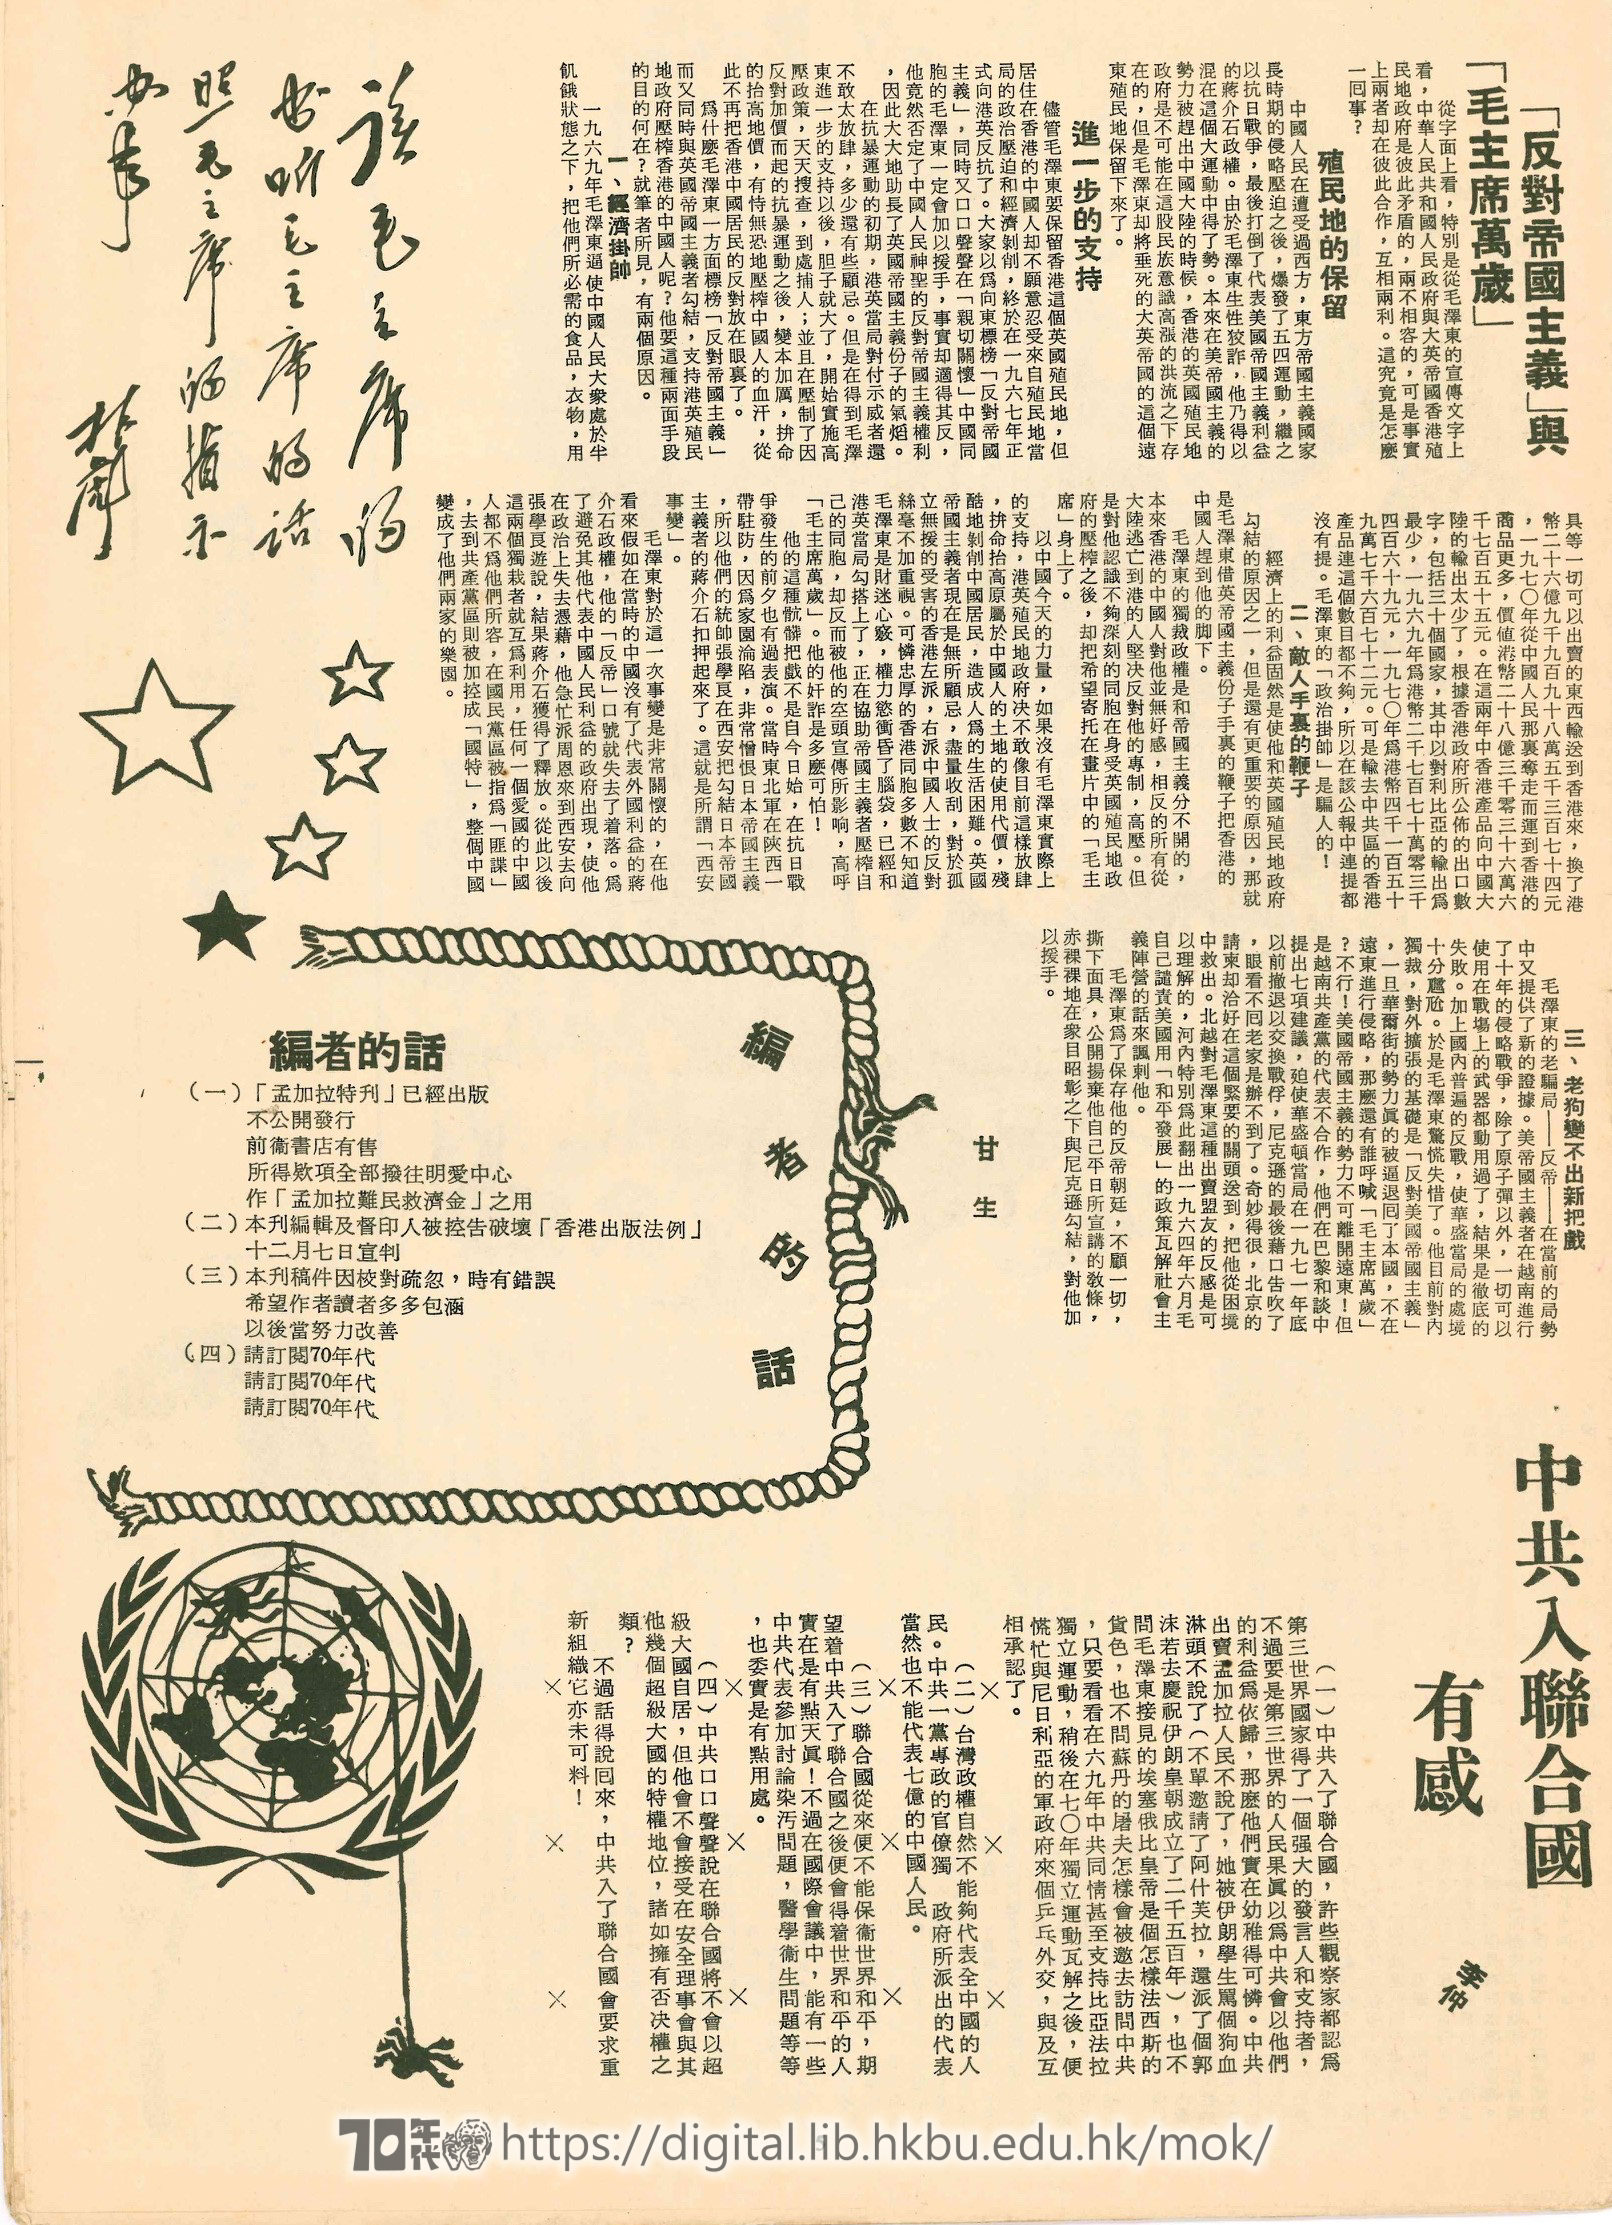  25 On Communist China joining the United Nations 李仲 